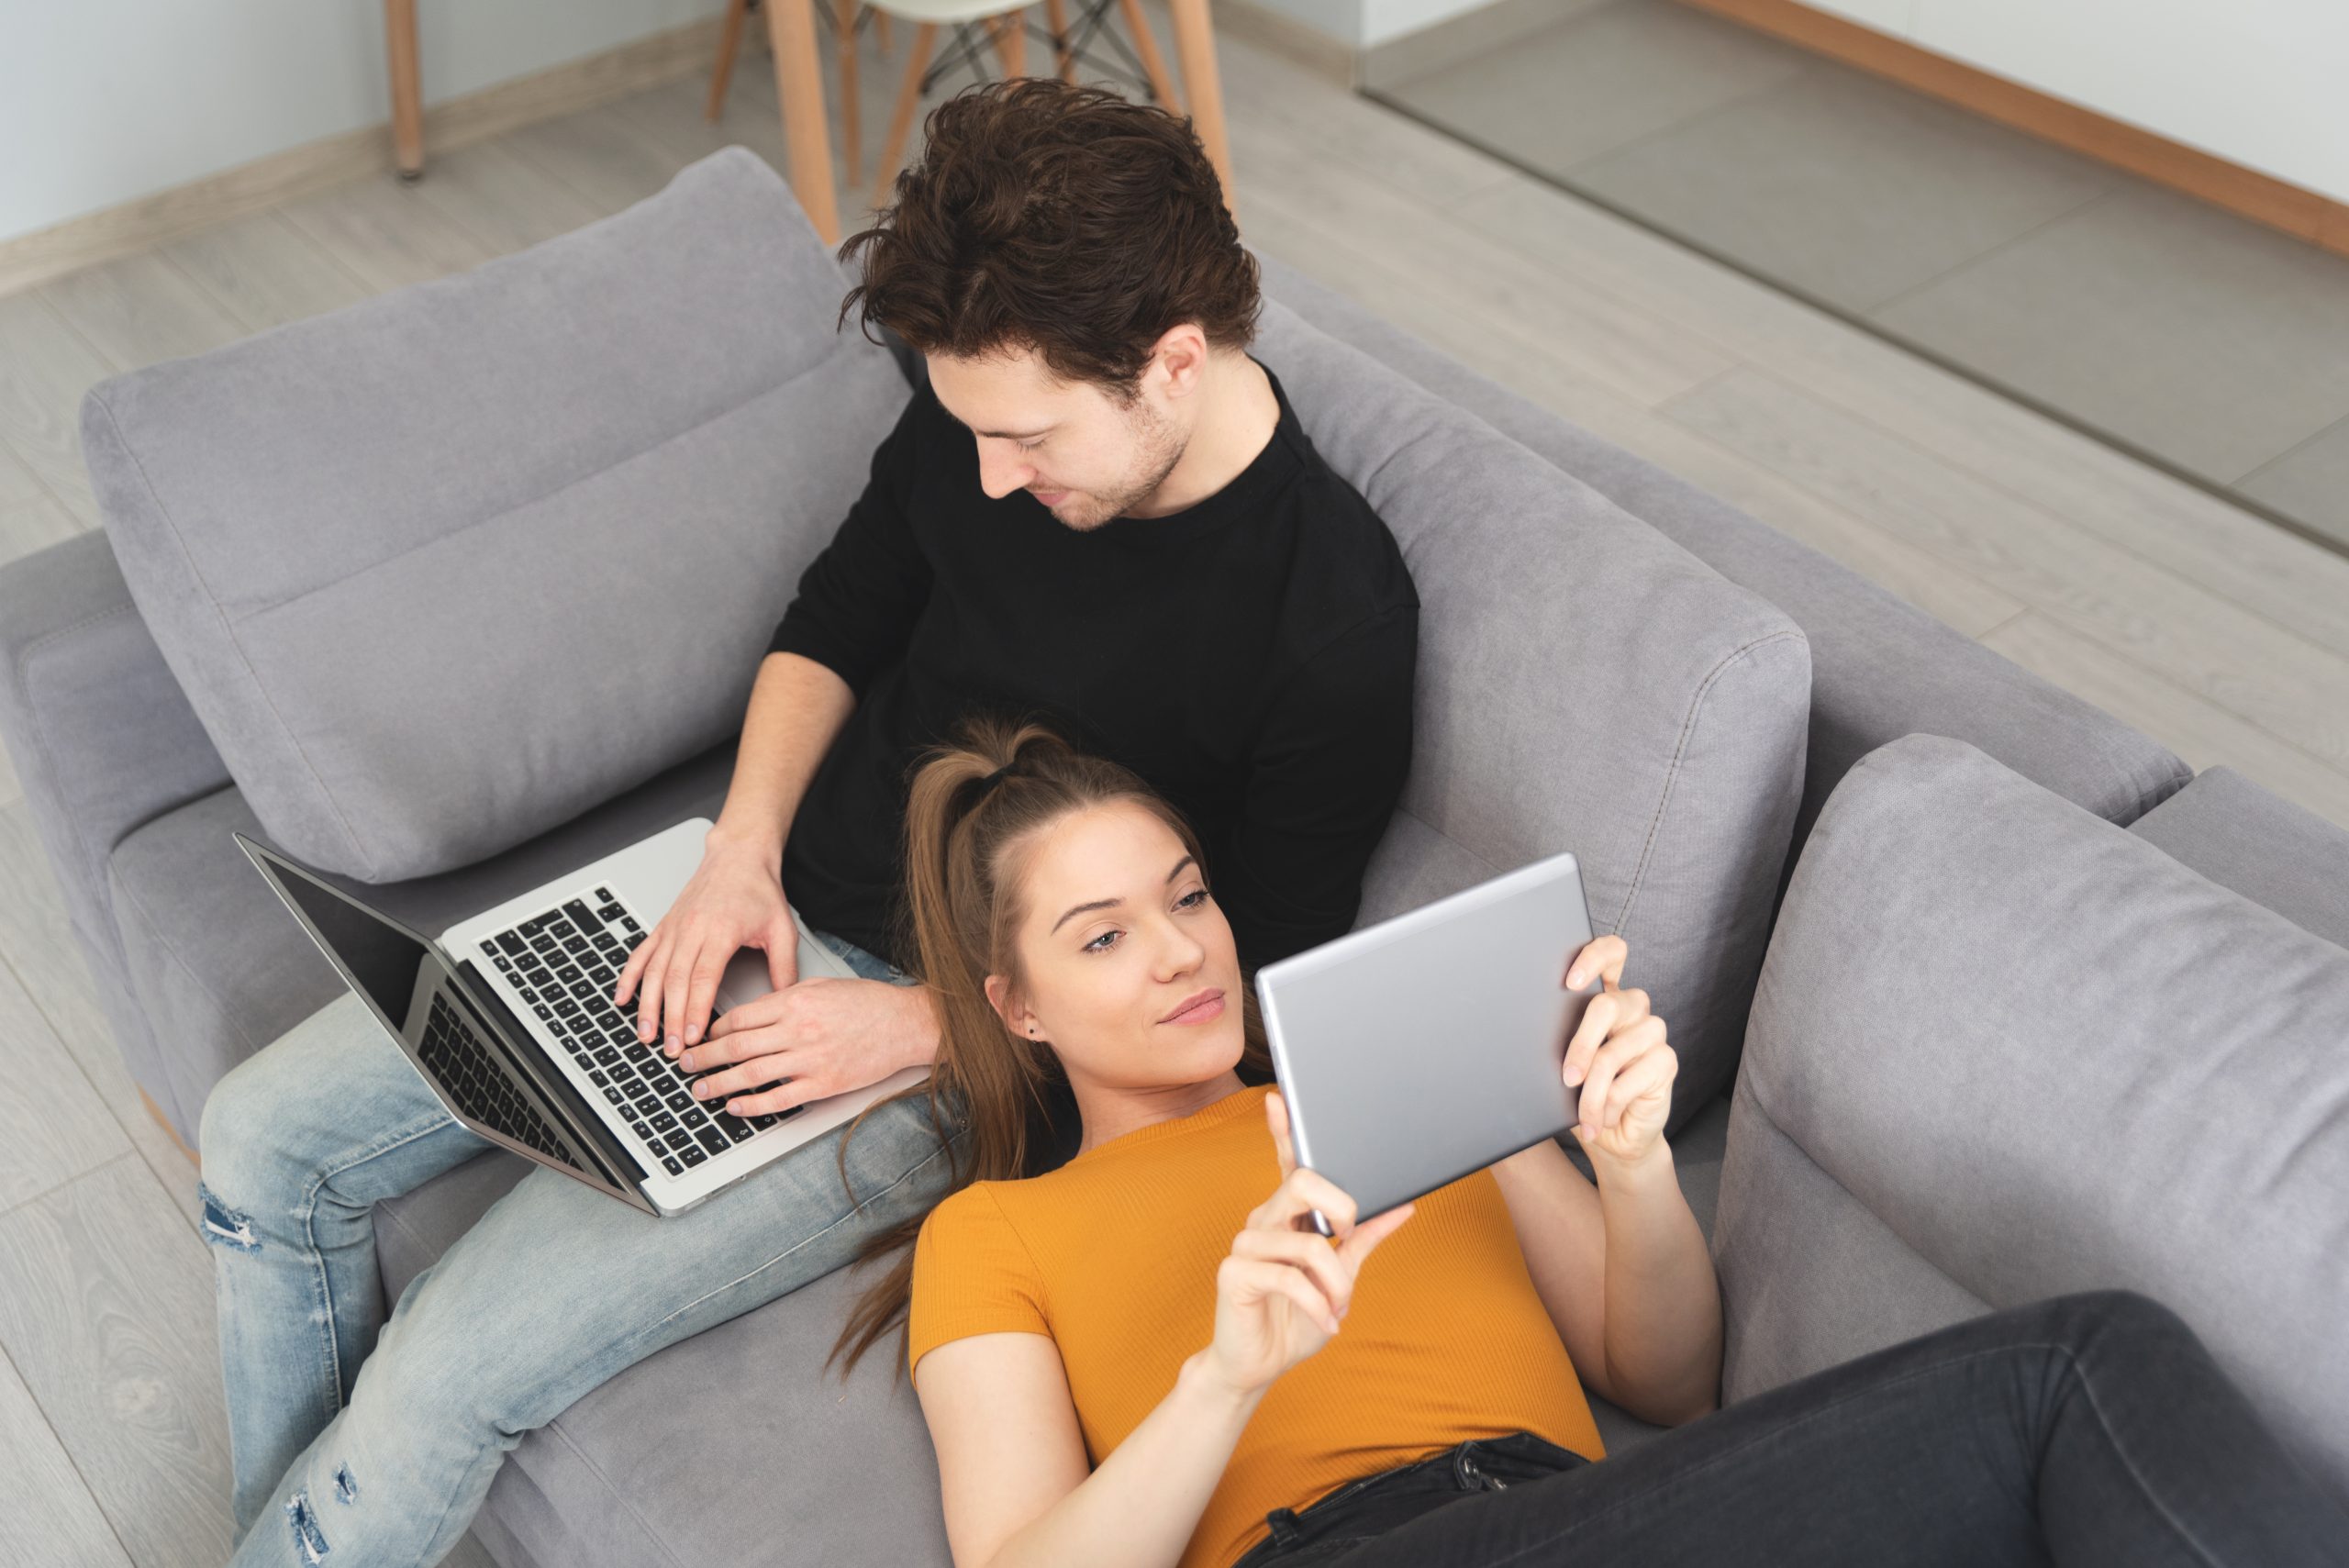 Couple on couch, using wi-fi signal in their home to connect to their wireless devices. Fiber and Wireless internet are both suitable for their wi-fi needs.